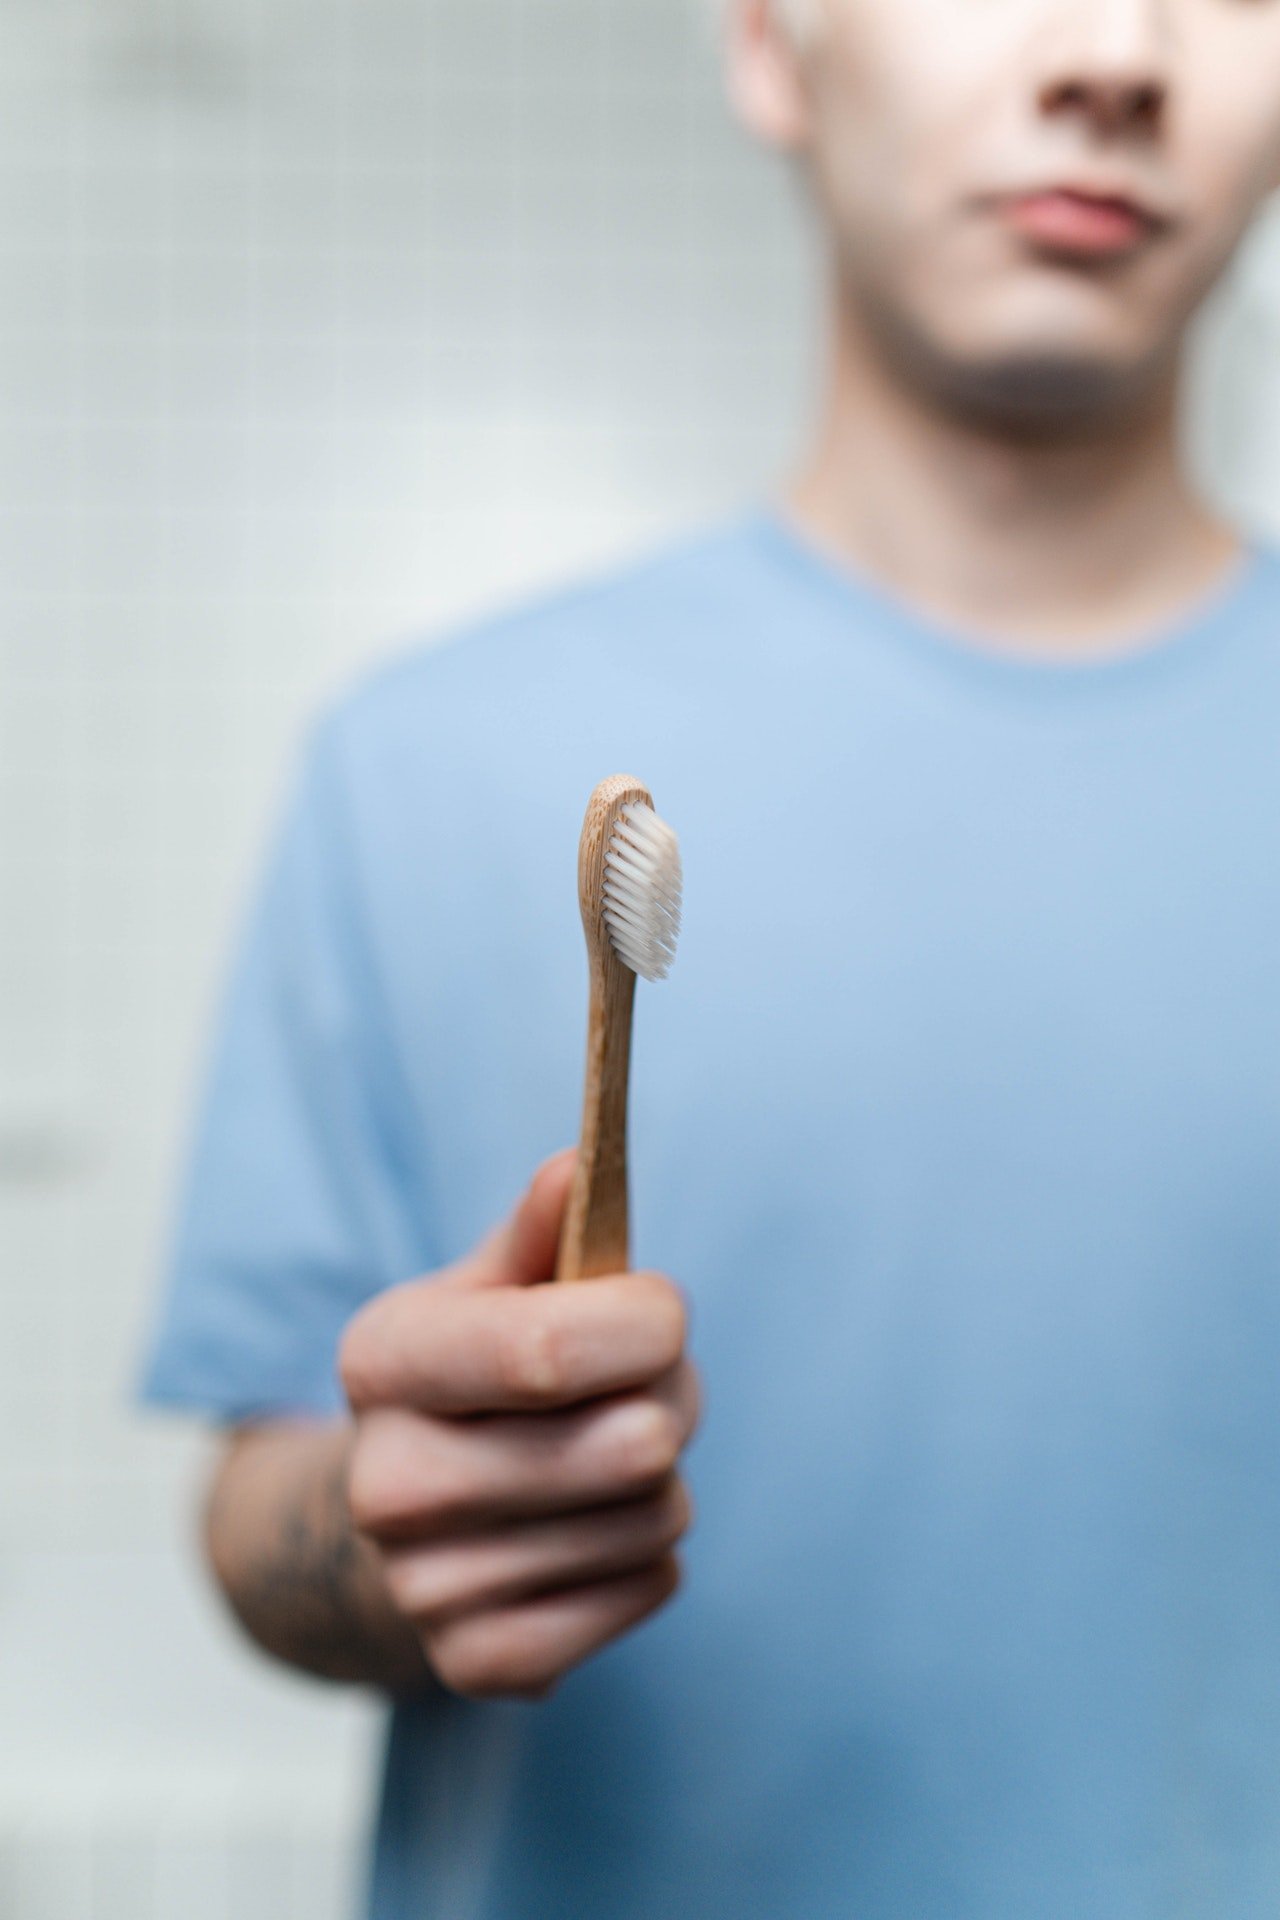 Photo of a man holding a toothbrush | Photo: Pexels